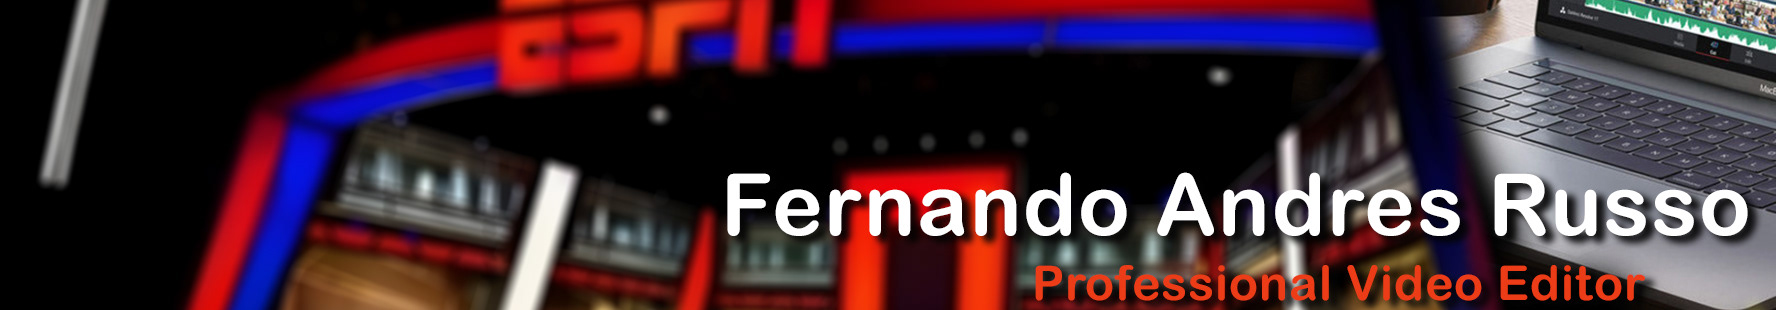 Fernando Andres Russo's profile banner